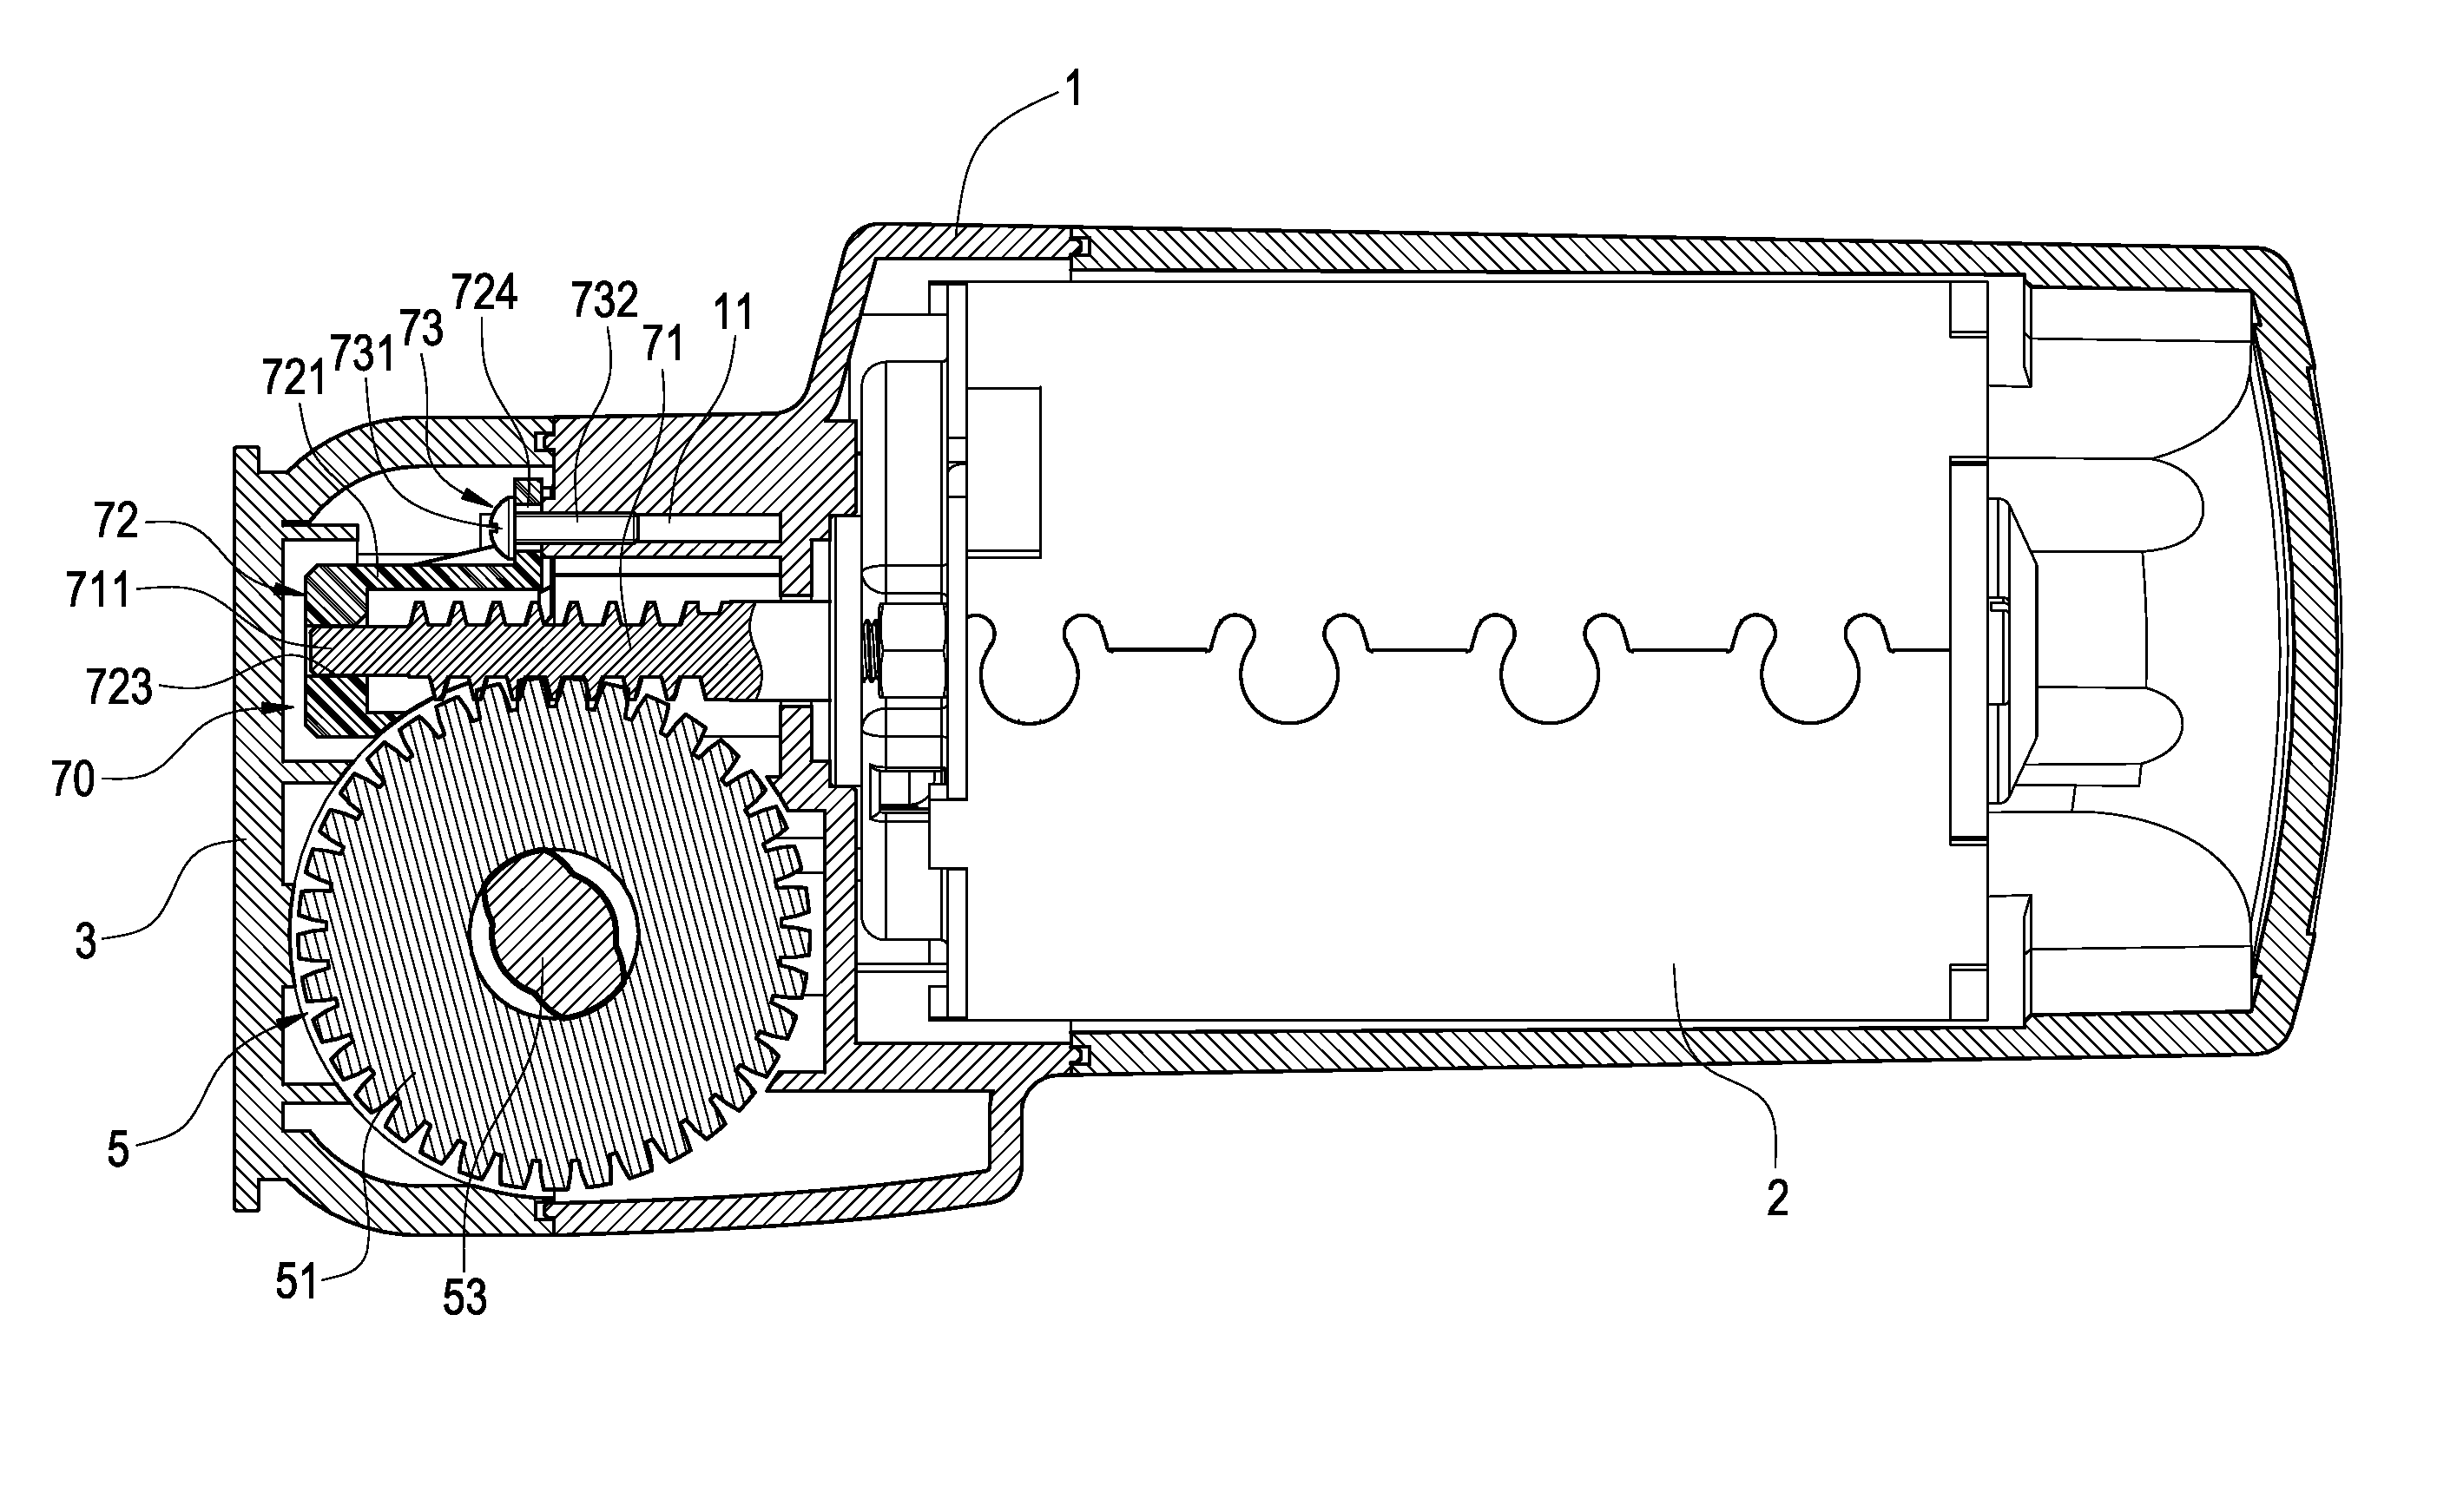 Spindle positioning means of linear actuator